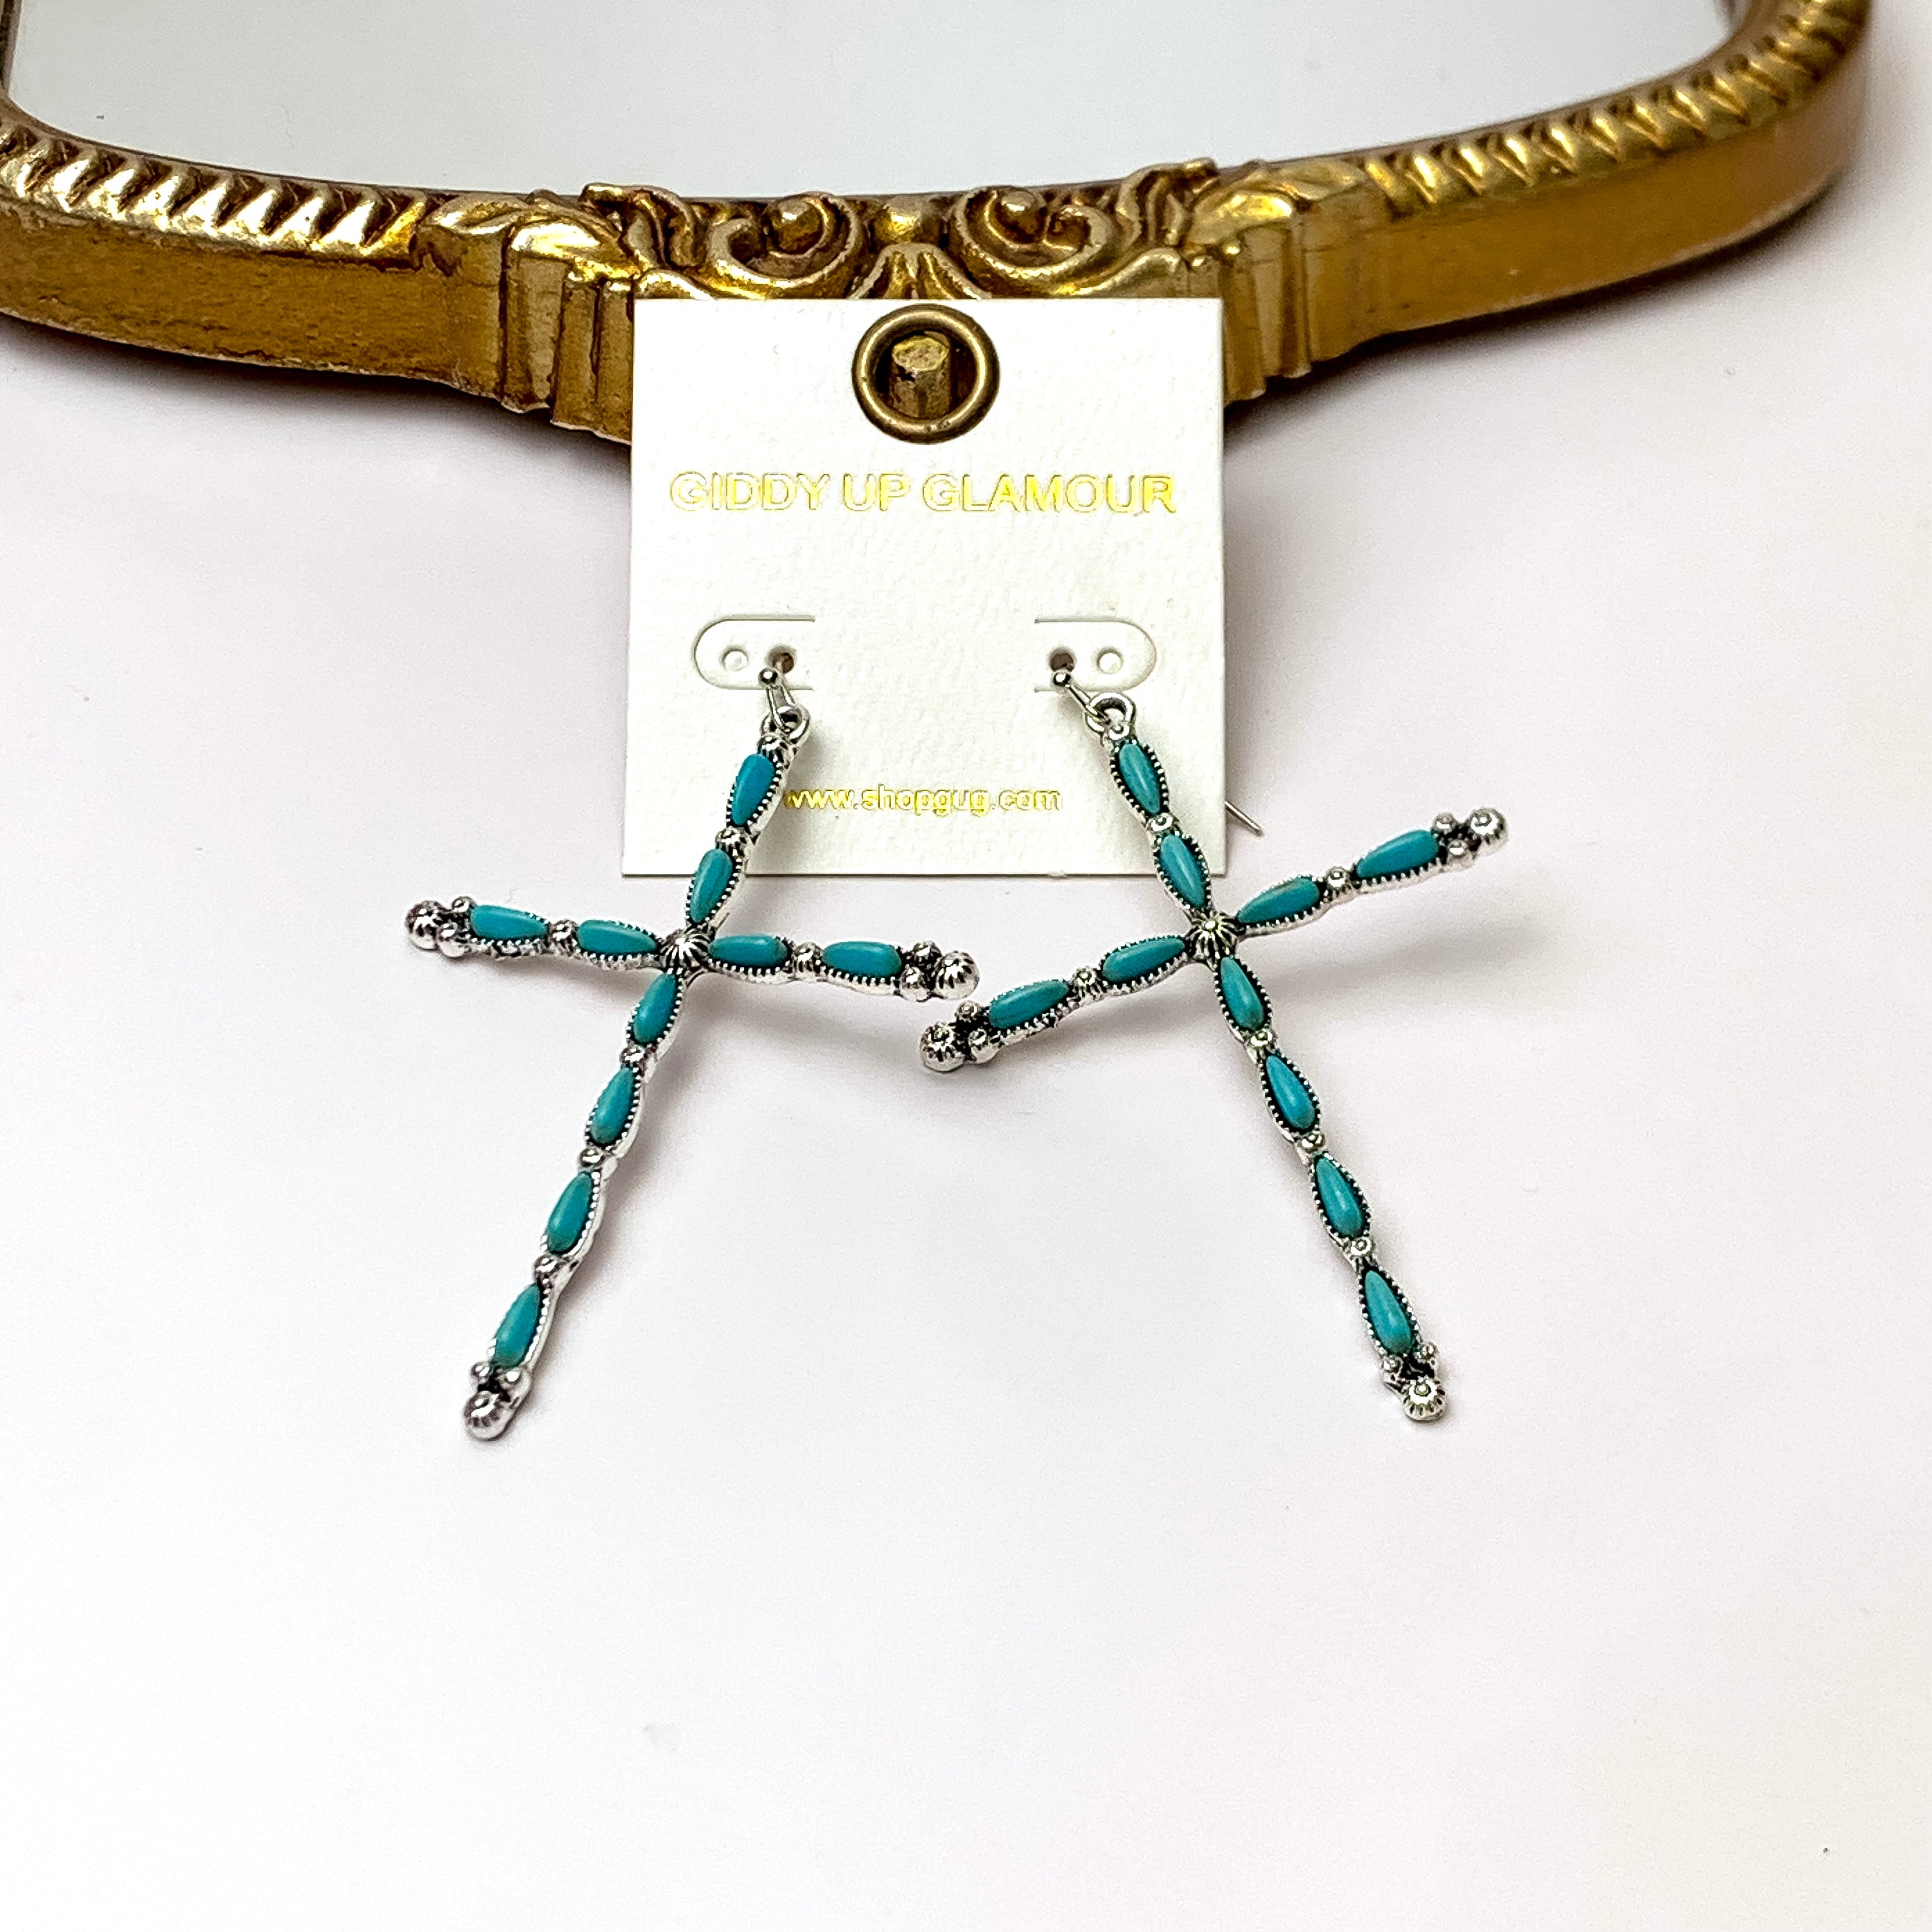 Silver Tone Slim Cross Drop Earrings with Faux Turquoise Stones - Giddy Up Glamour Boutique